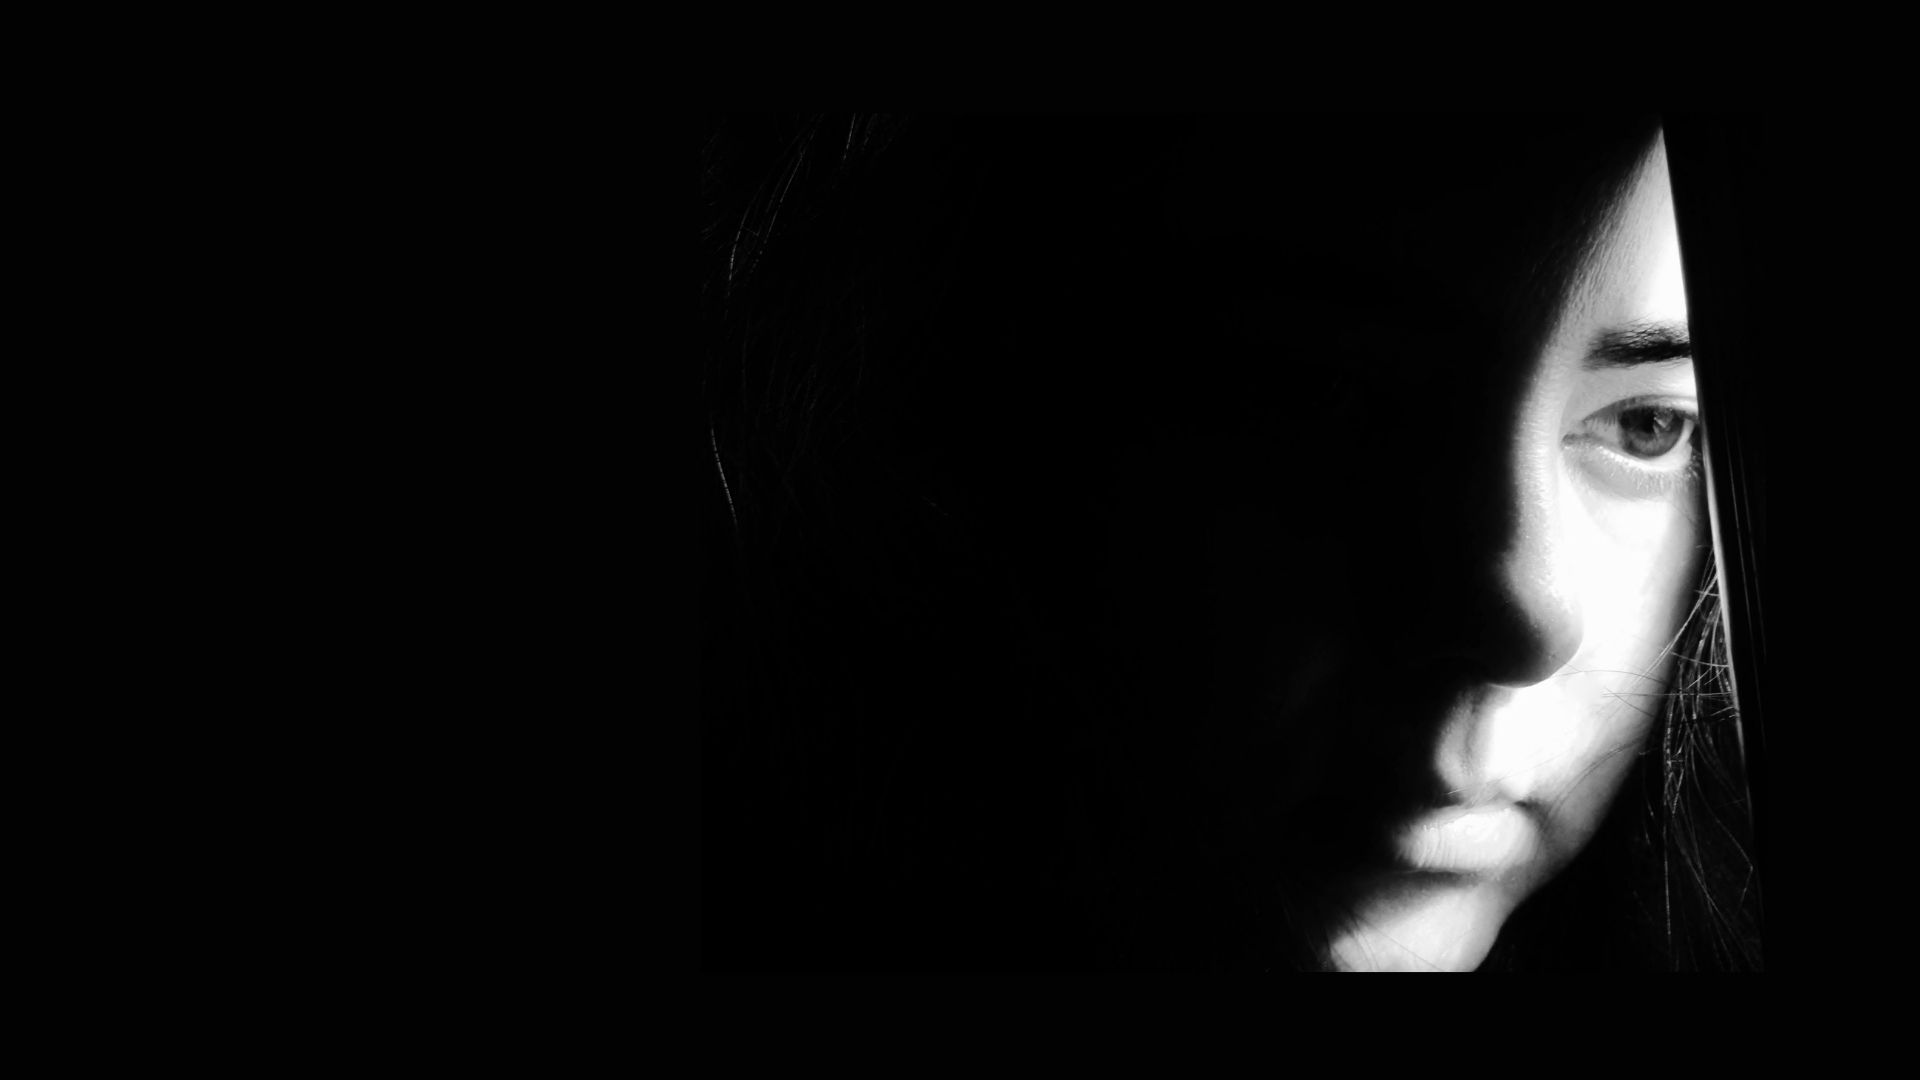 a black and white image with half a face peeking through a black curtain